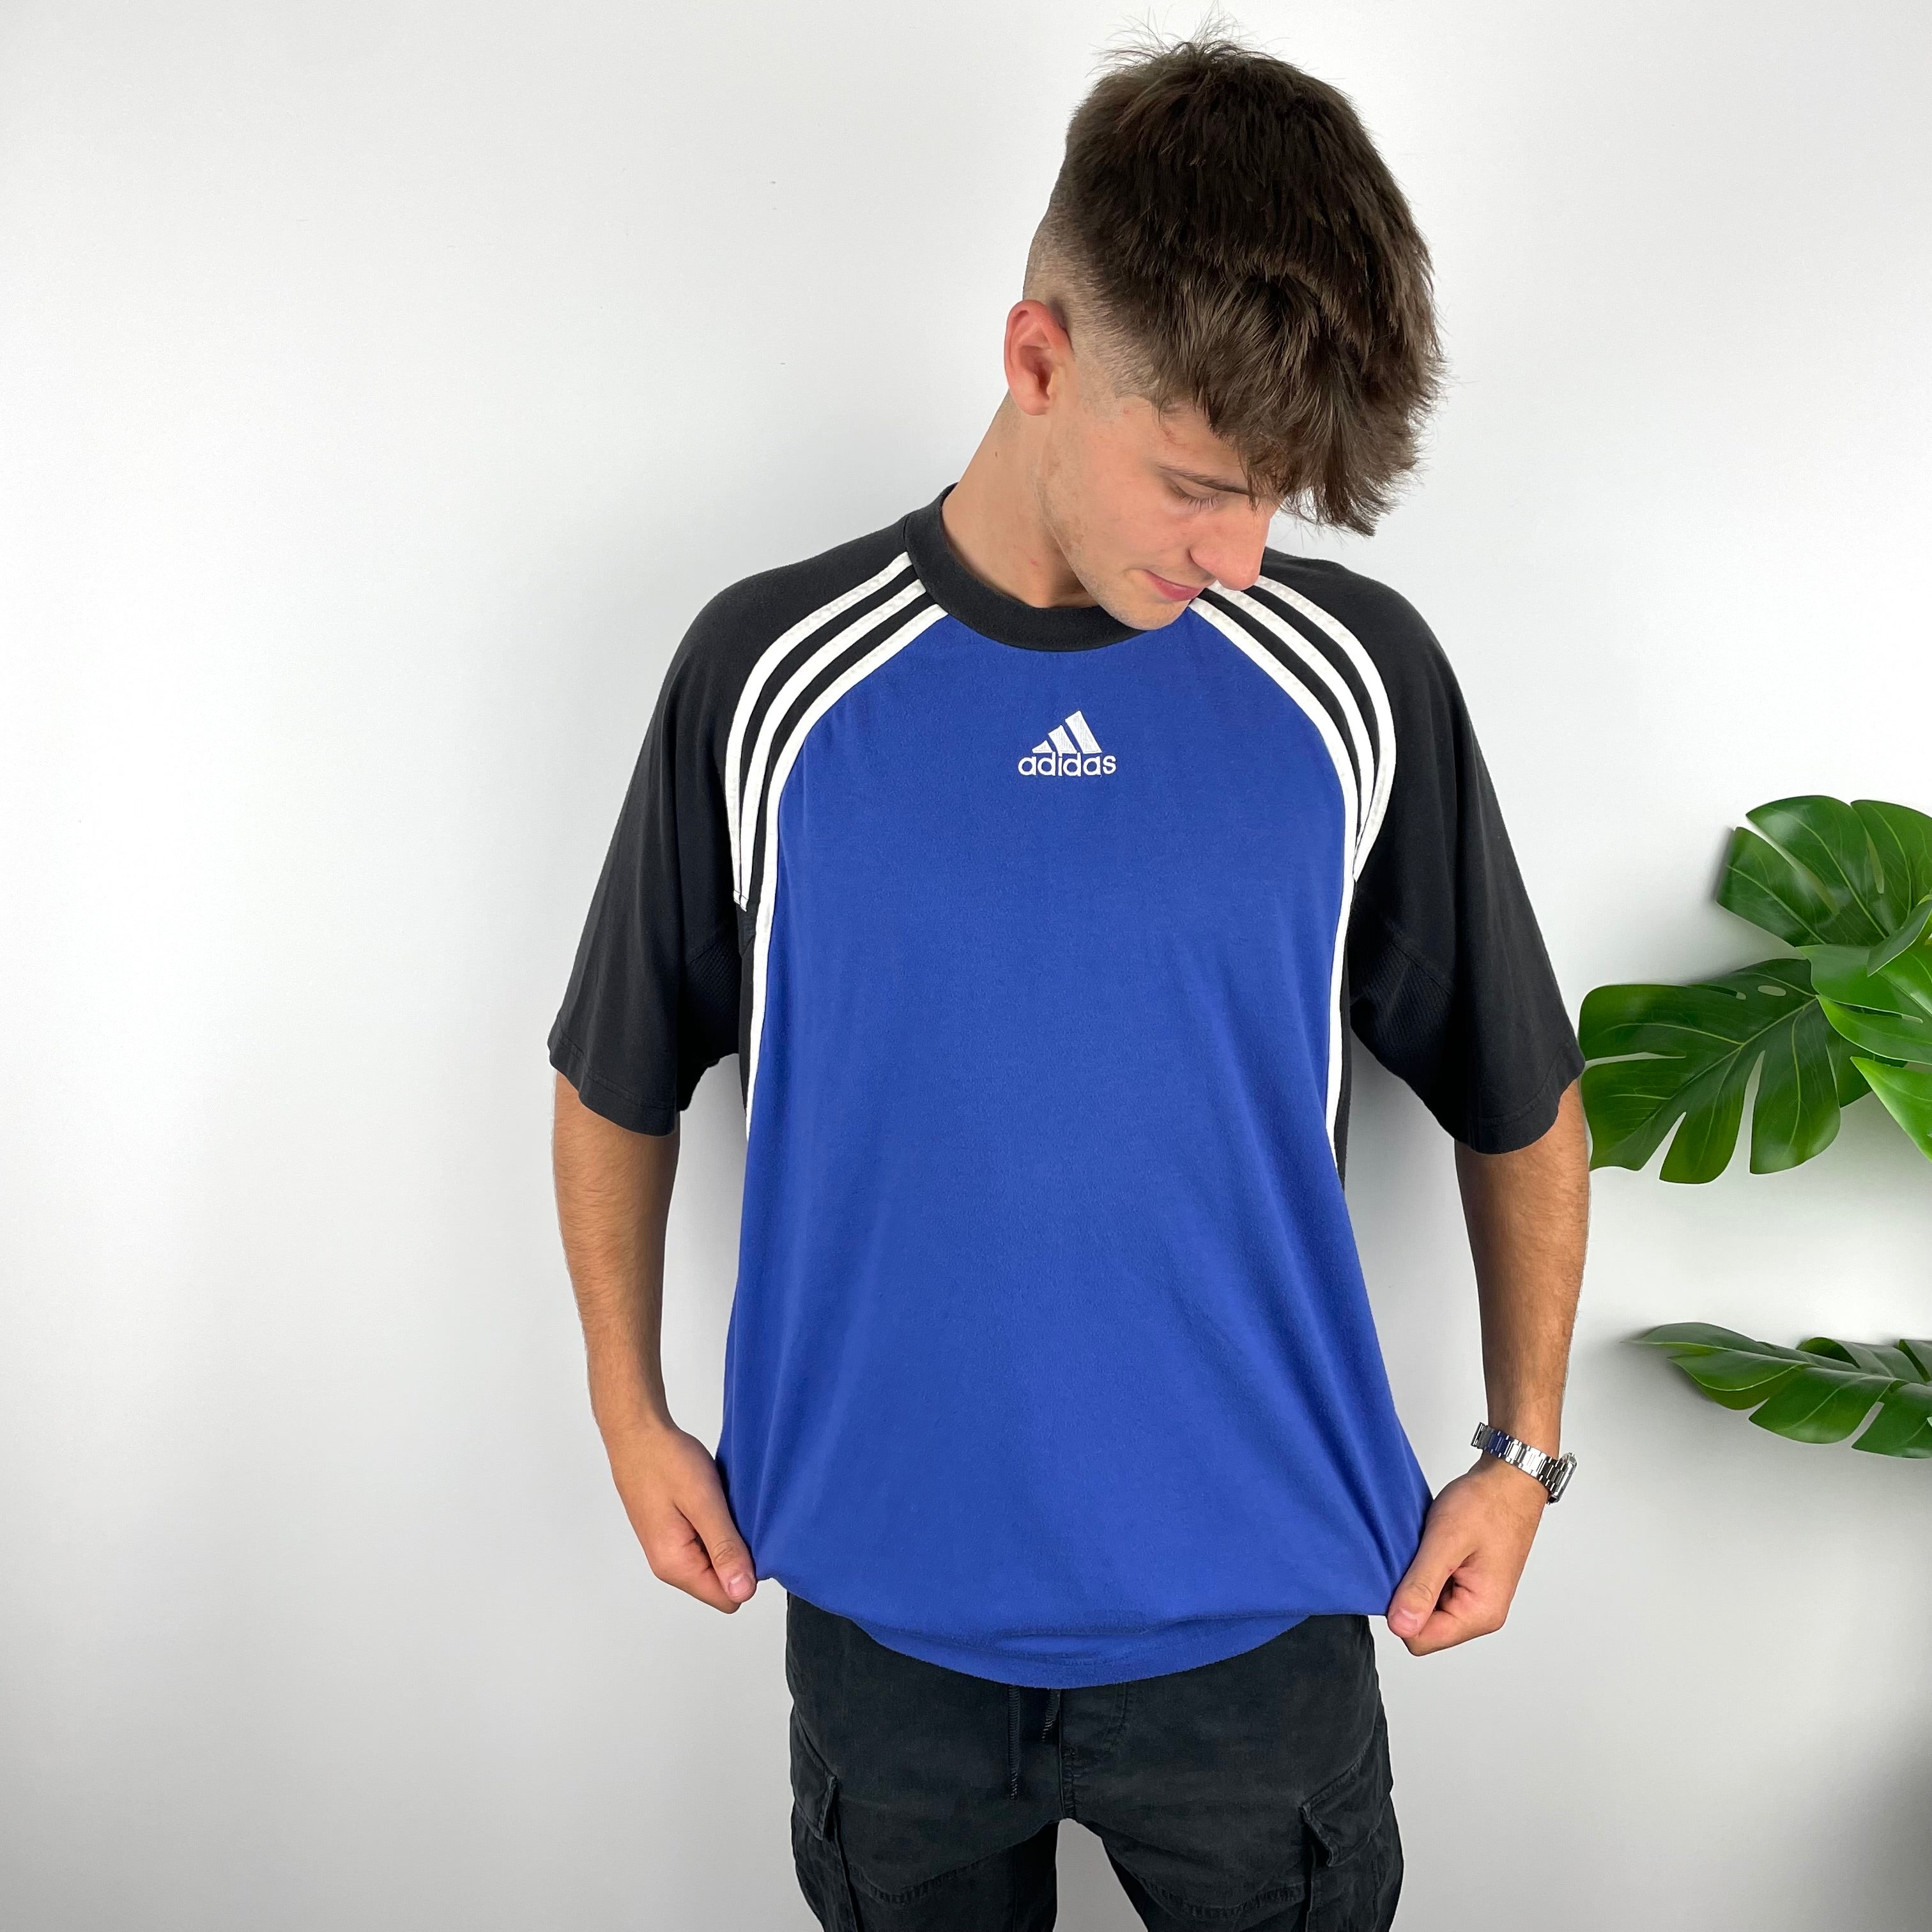 Adidas RARE Black & Blue Embroidered Spell Out T Shirt (XL)